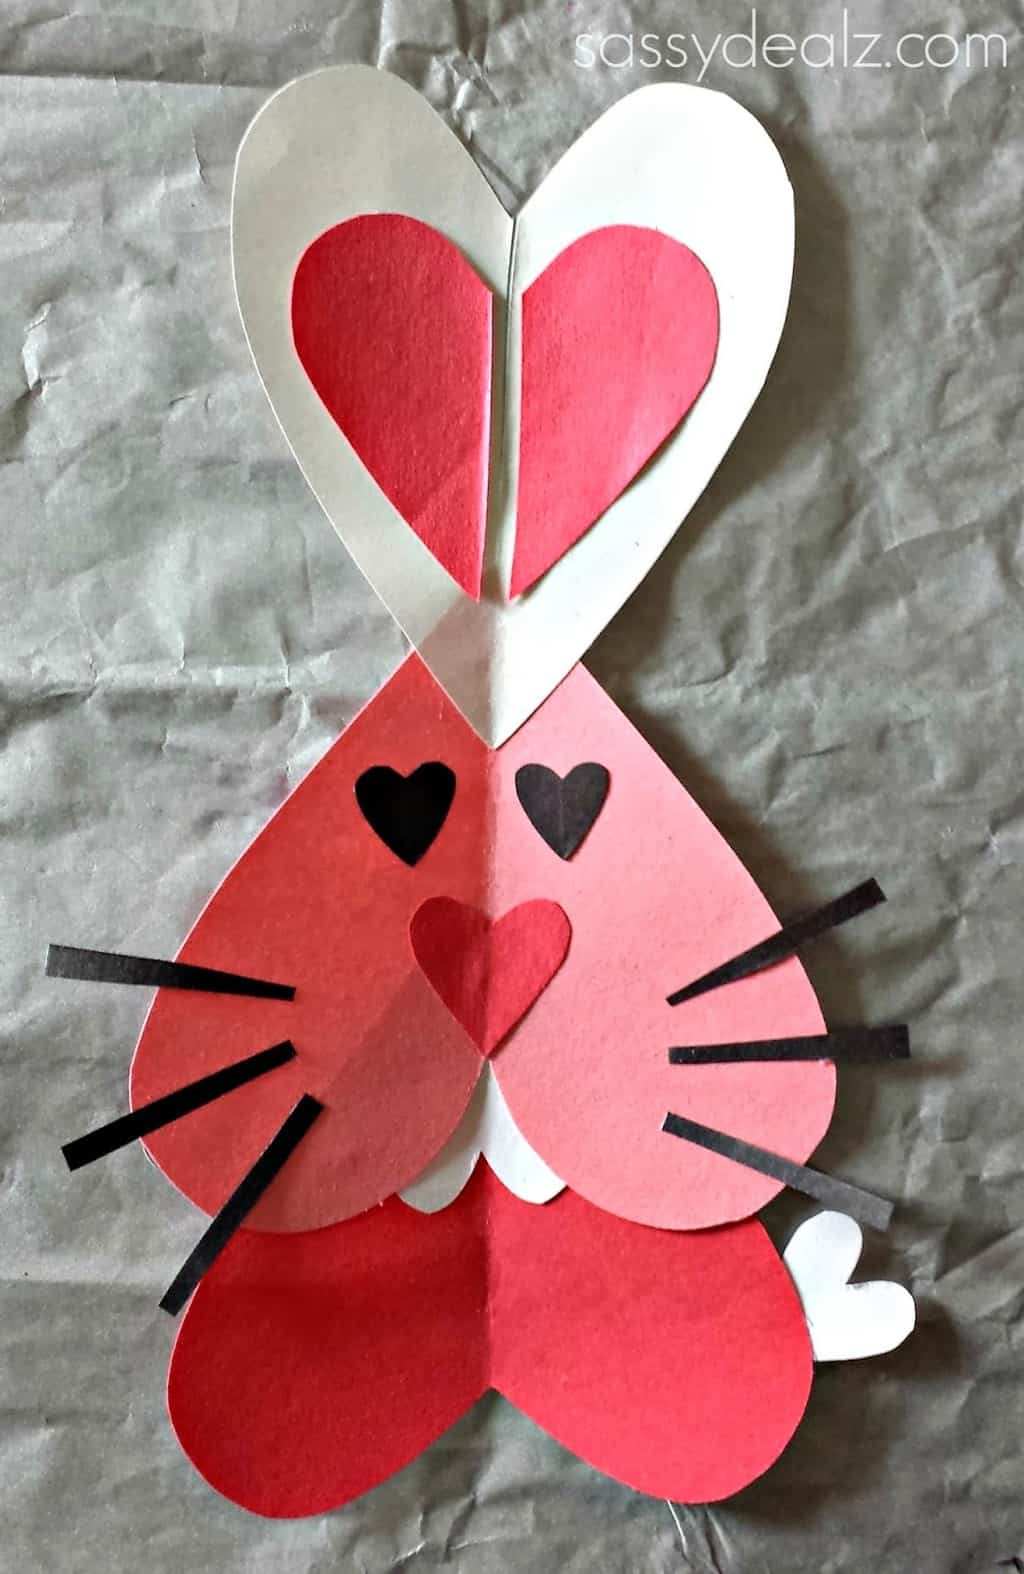 easy bunny craft made out of red and white hearts